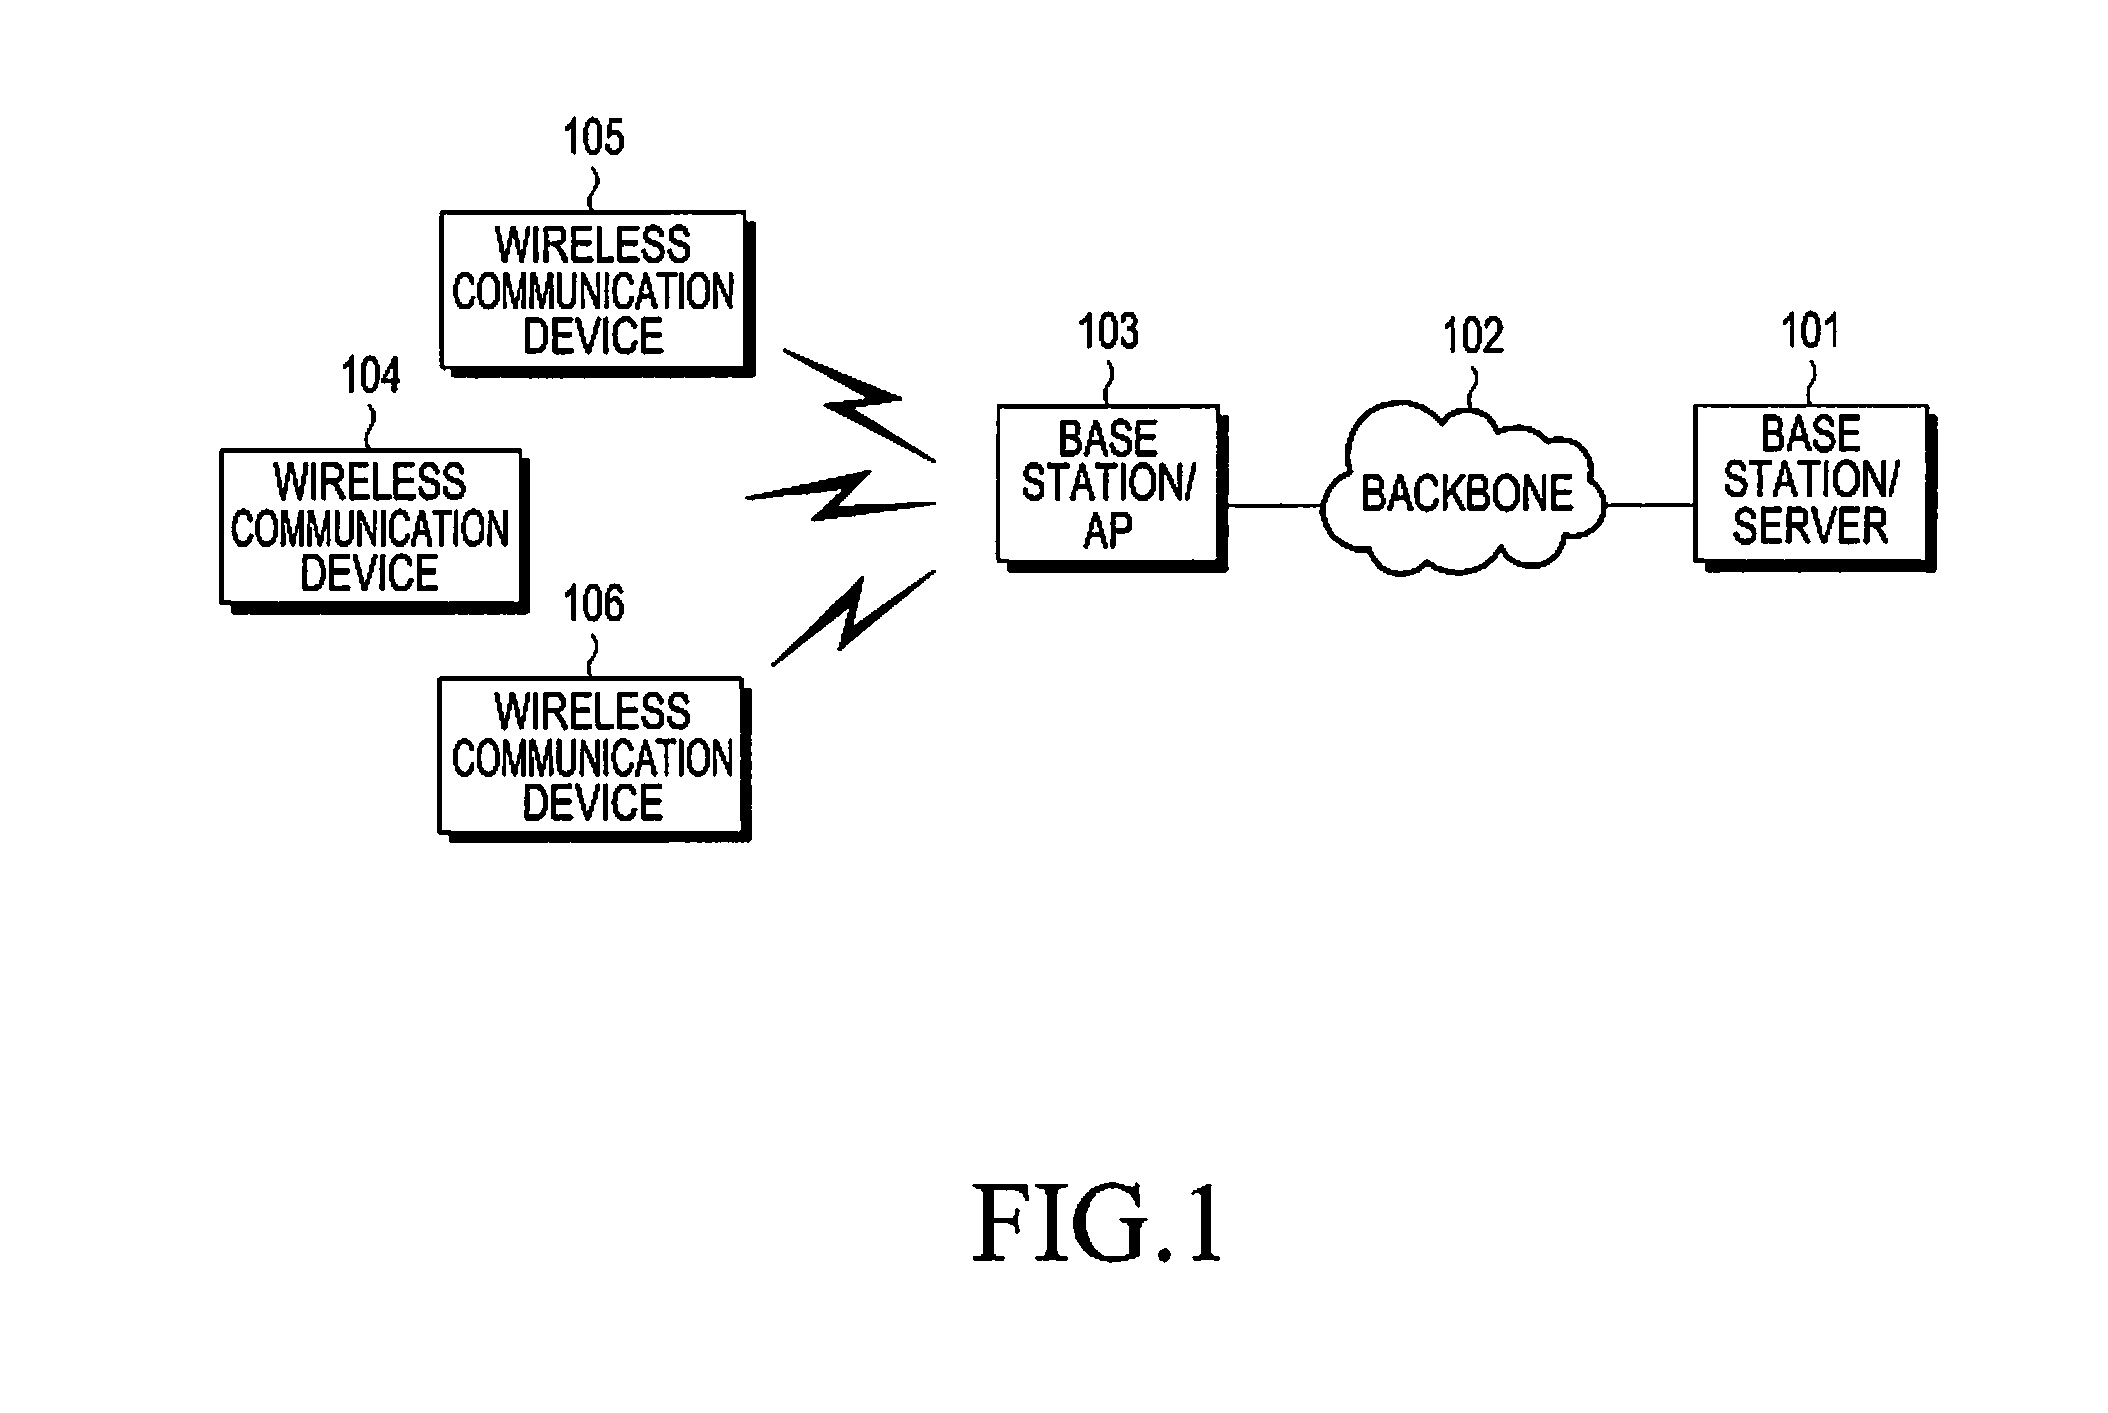 Wireless power charging method and apparatus for electronic device